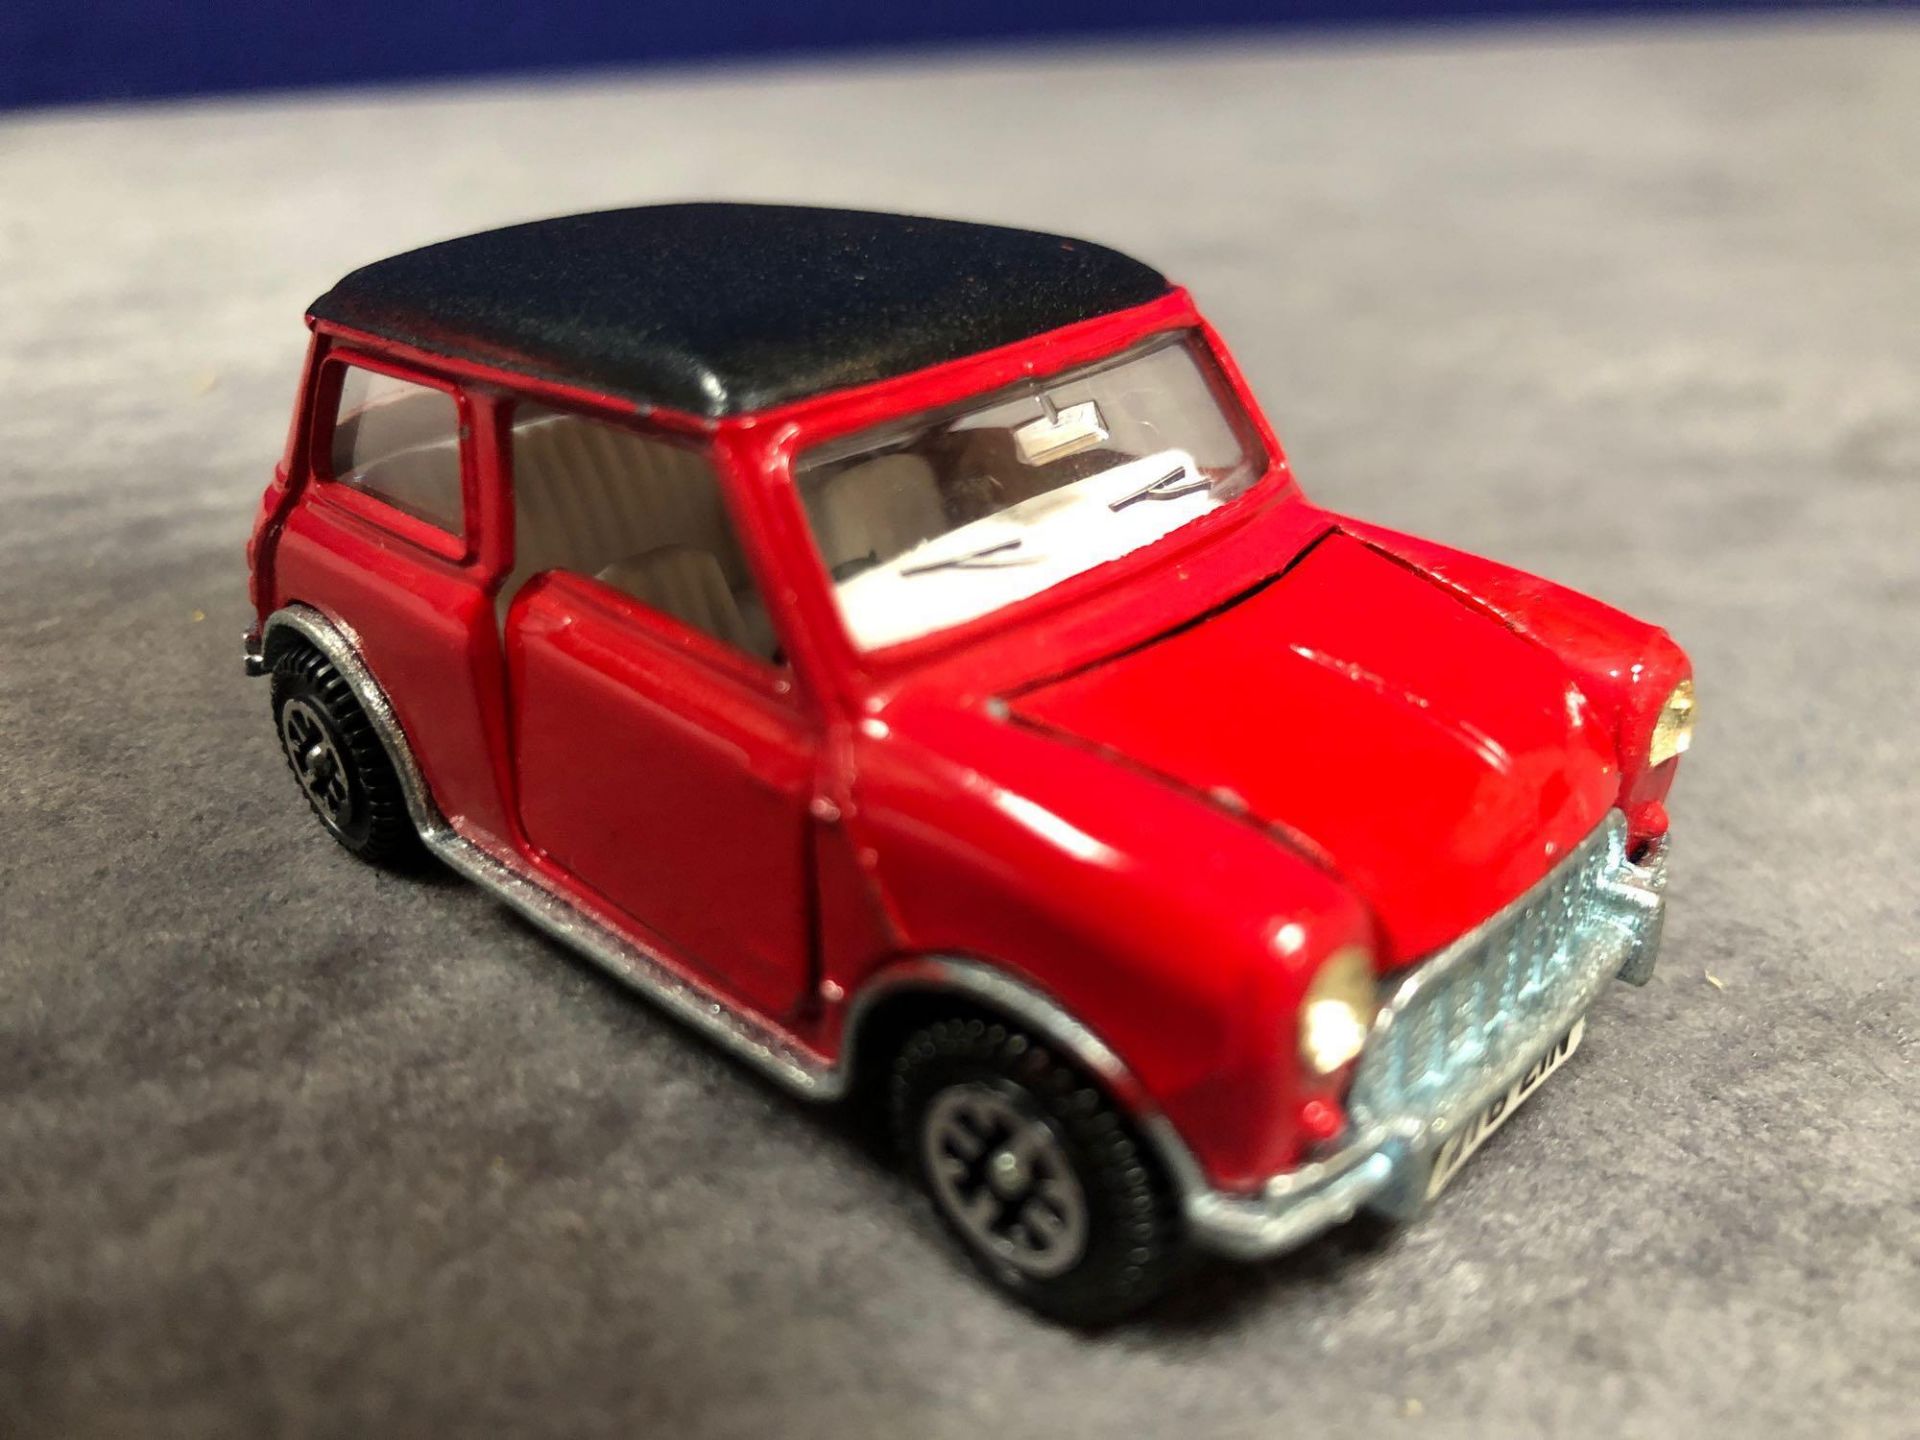 Dinky Mini In Red With A Black And White Interior Unboxed Nr Mint Roof Marked Has A Good Shine - Image 2 of 4